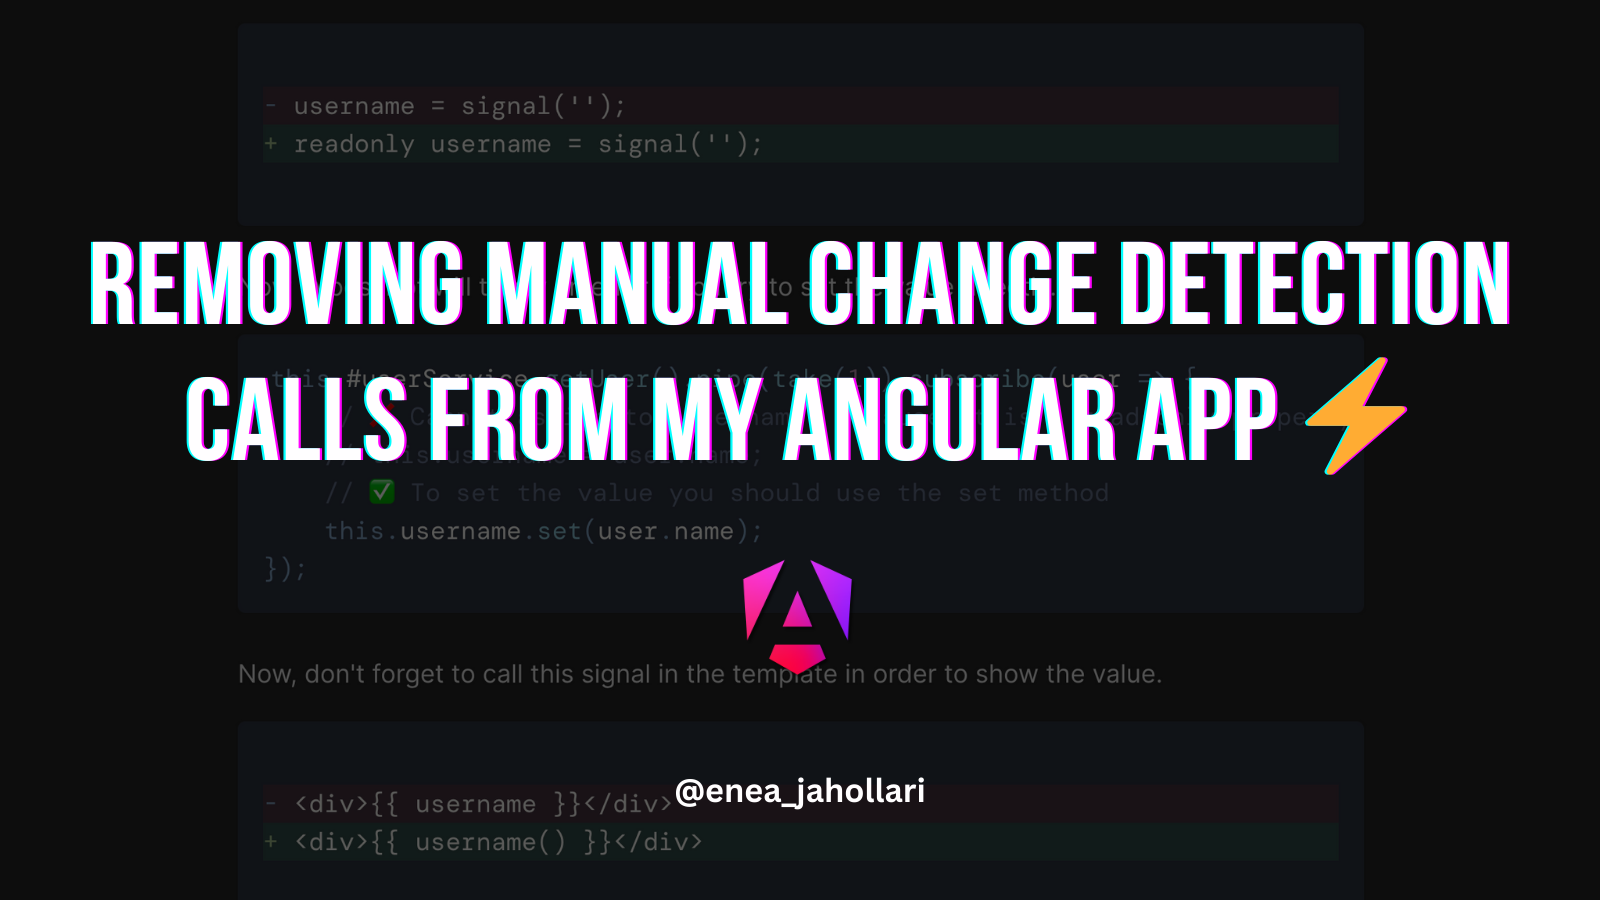 Removing manual change detection calls from my Angular app